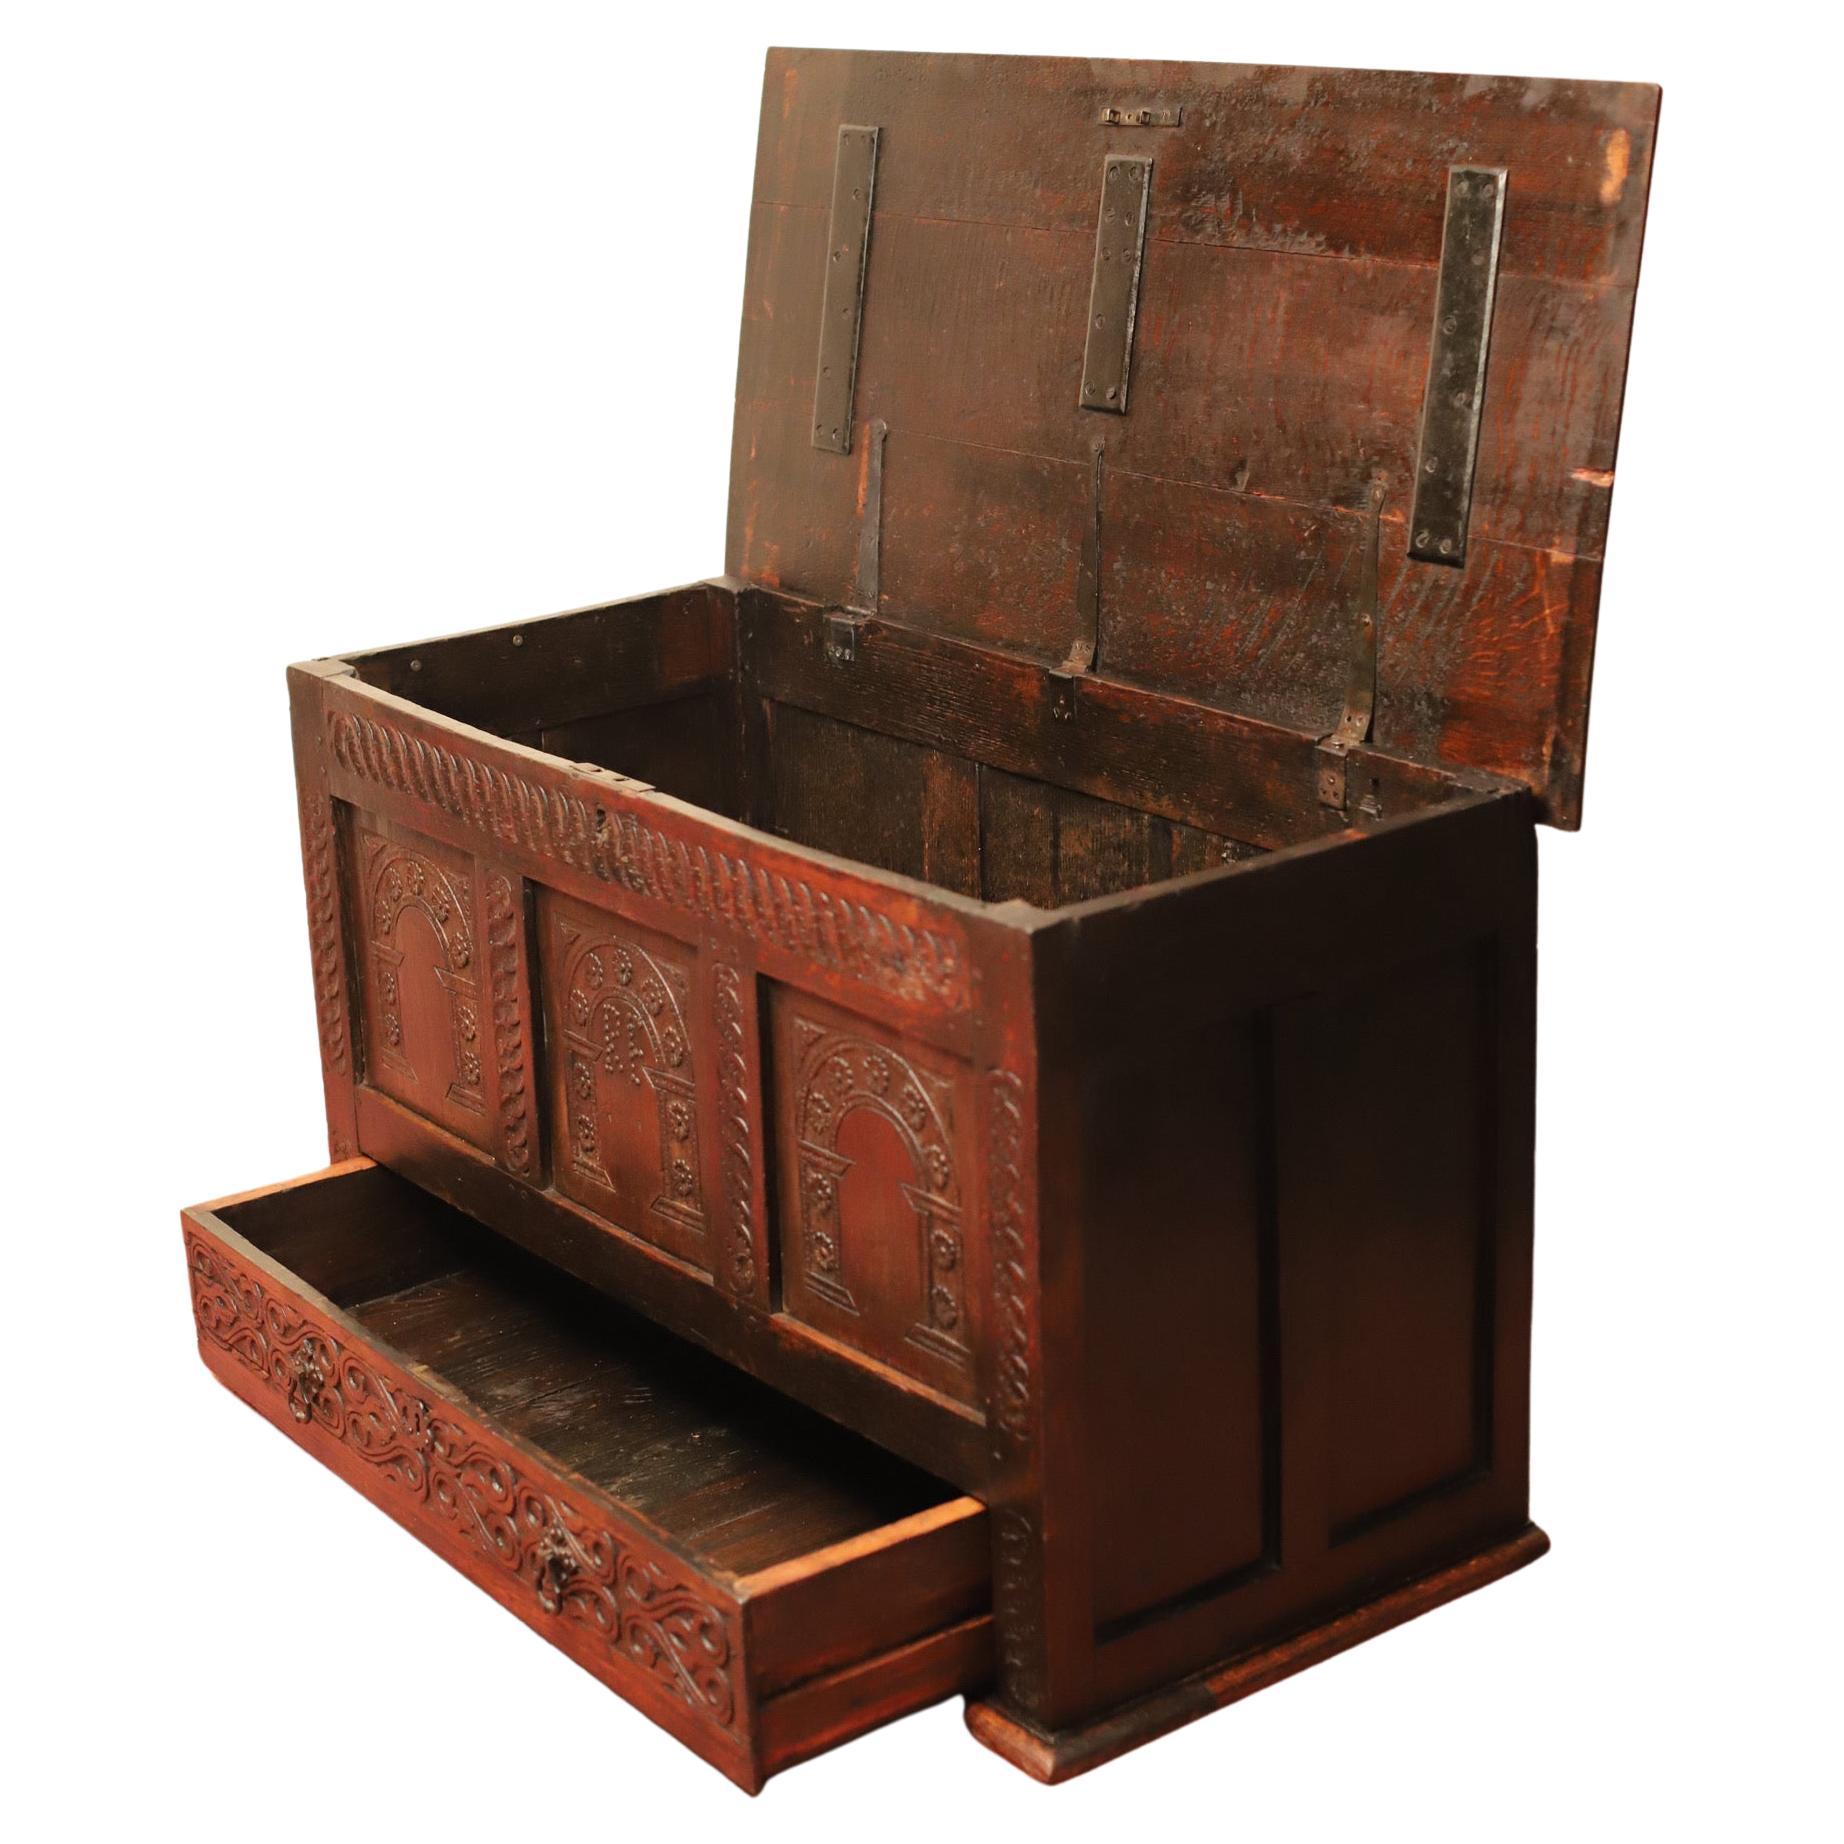 Unique Victorian Carved Oak Mule Chest Made By Hewetson, Milner & Thexton Ltd , with hinged lid and the base is fitted with one drawer , circa 1880 .
Trading between 1839 and 1910 under various names, Hewetson & Milner was a cabinet maker,